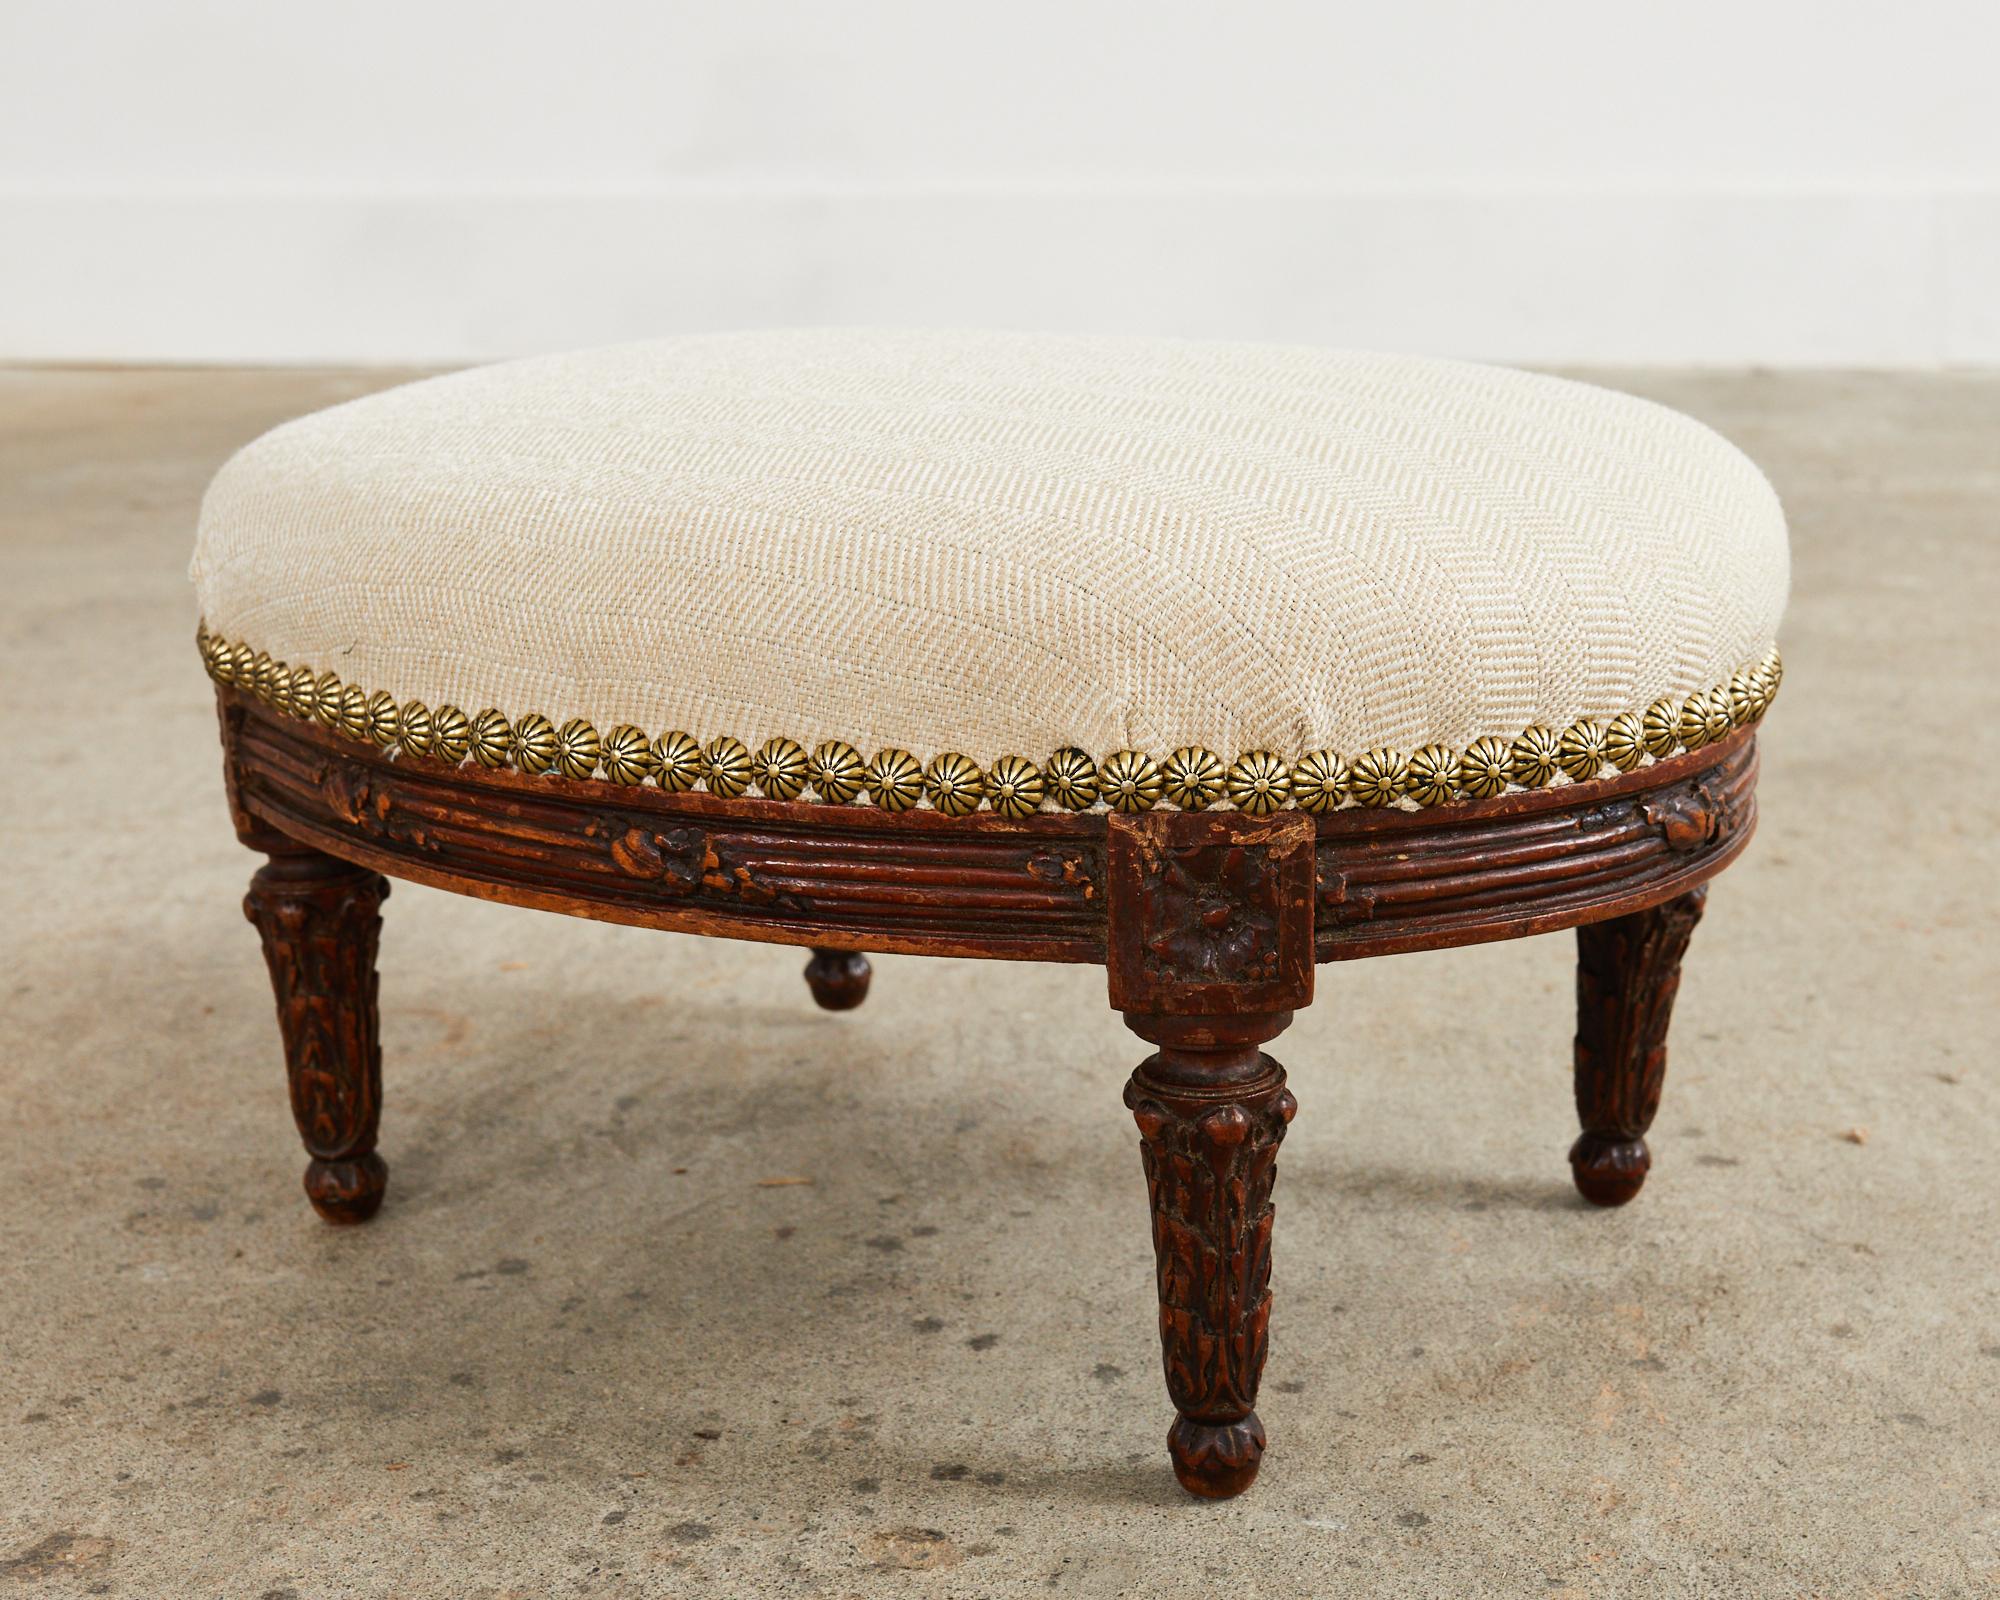 18th Century French Louis XVI Diminutive Mahogany Footstool In Good Condition For Sale In Rio Vista, CA